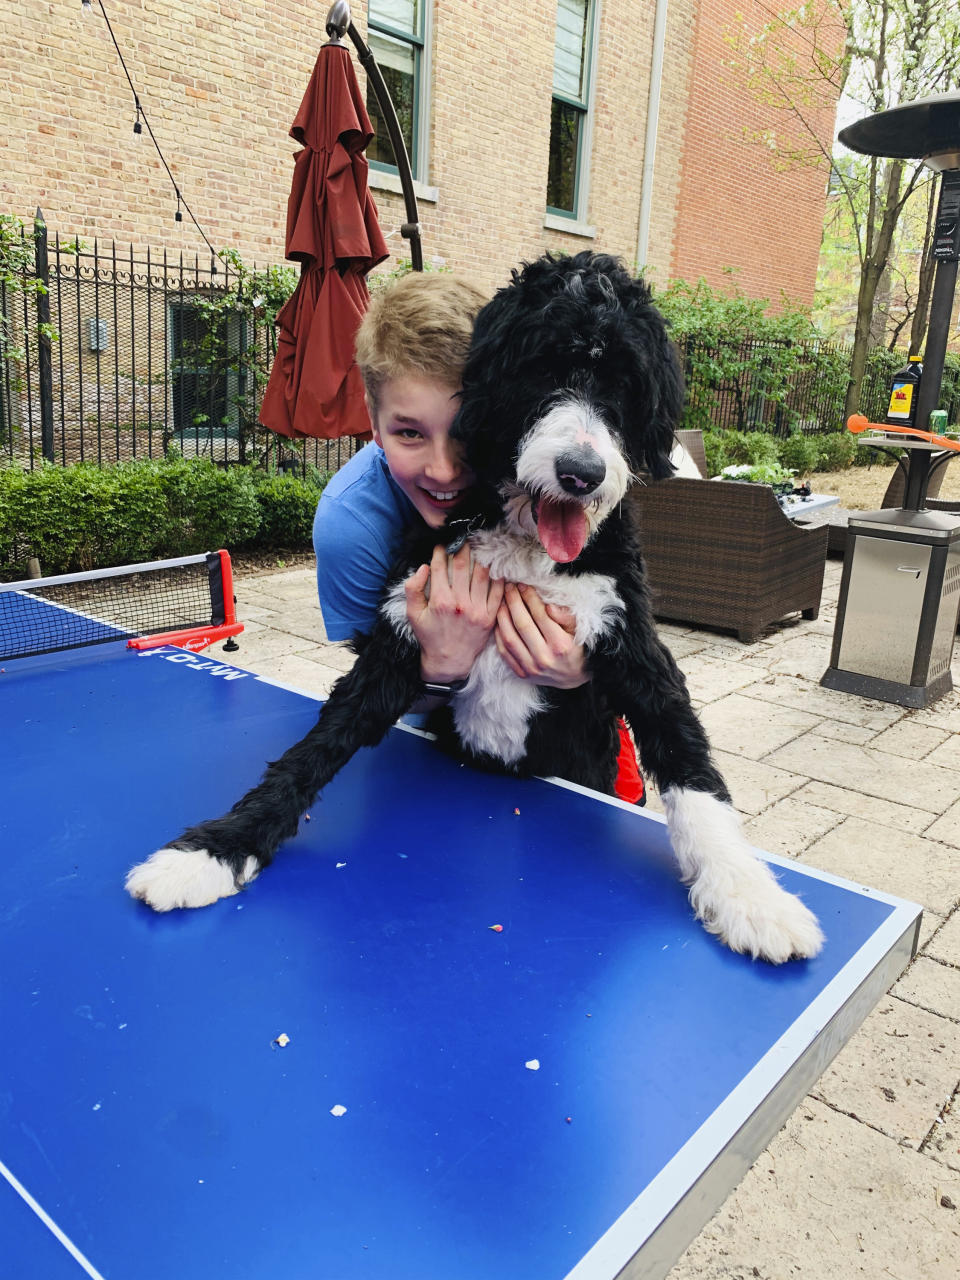 In this Saturday, May 2, 2020 photo provided by his family, Hudson Drutchas, 12, hugs his dog, Ty, outside his Chicago home. Hudson says his pets are helping get him through the pandemic. (Kristin Drutchas via AP)